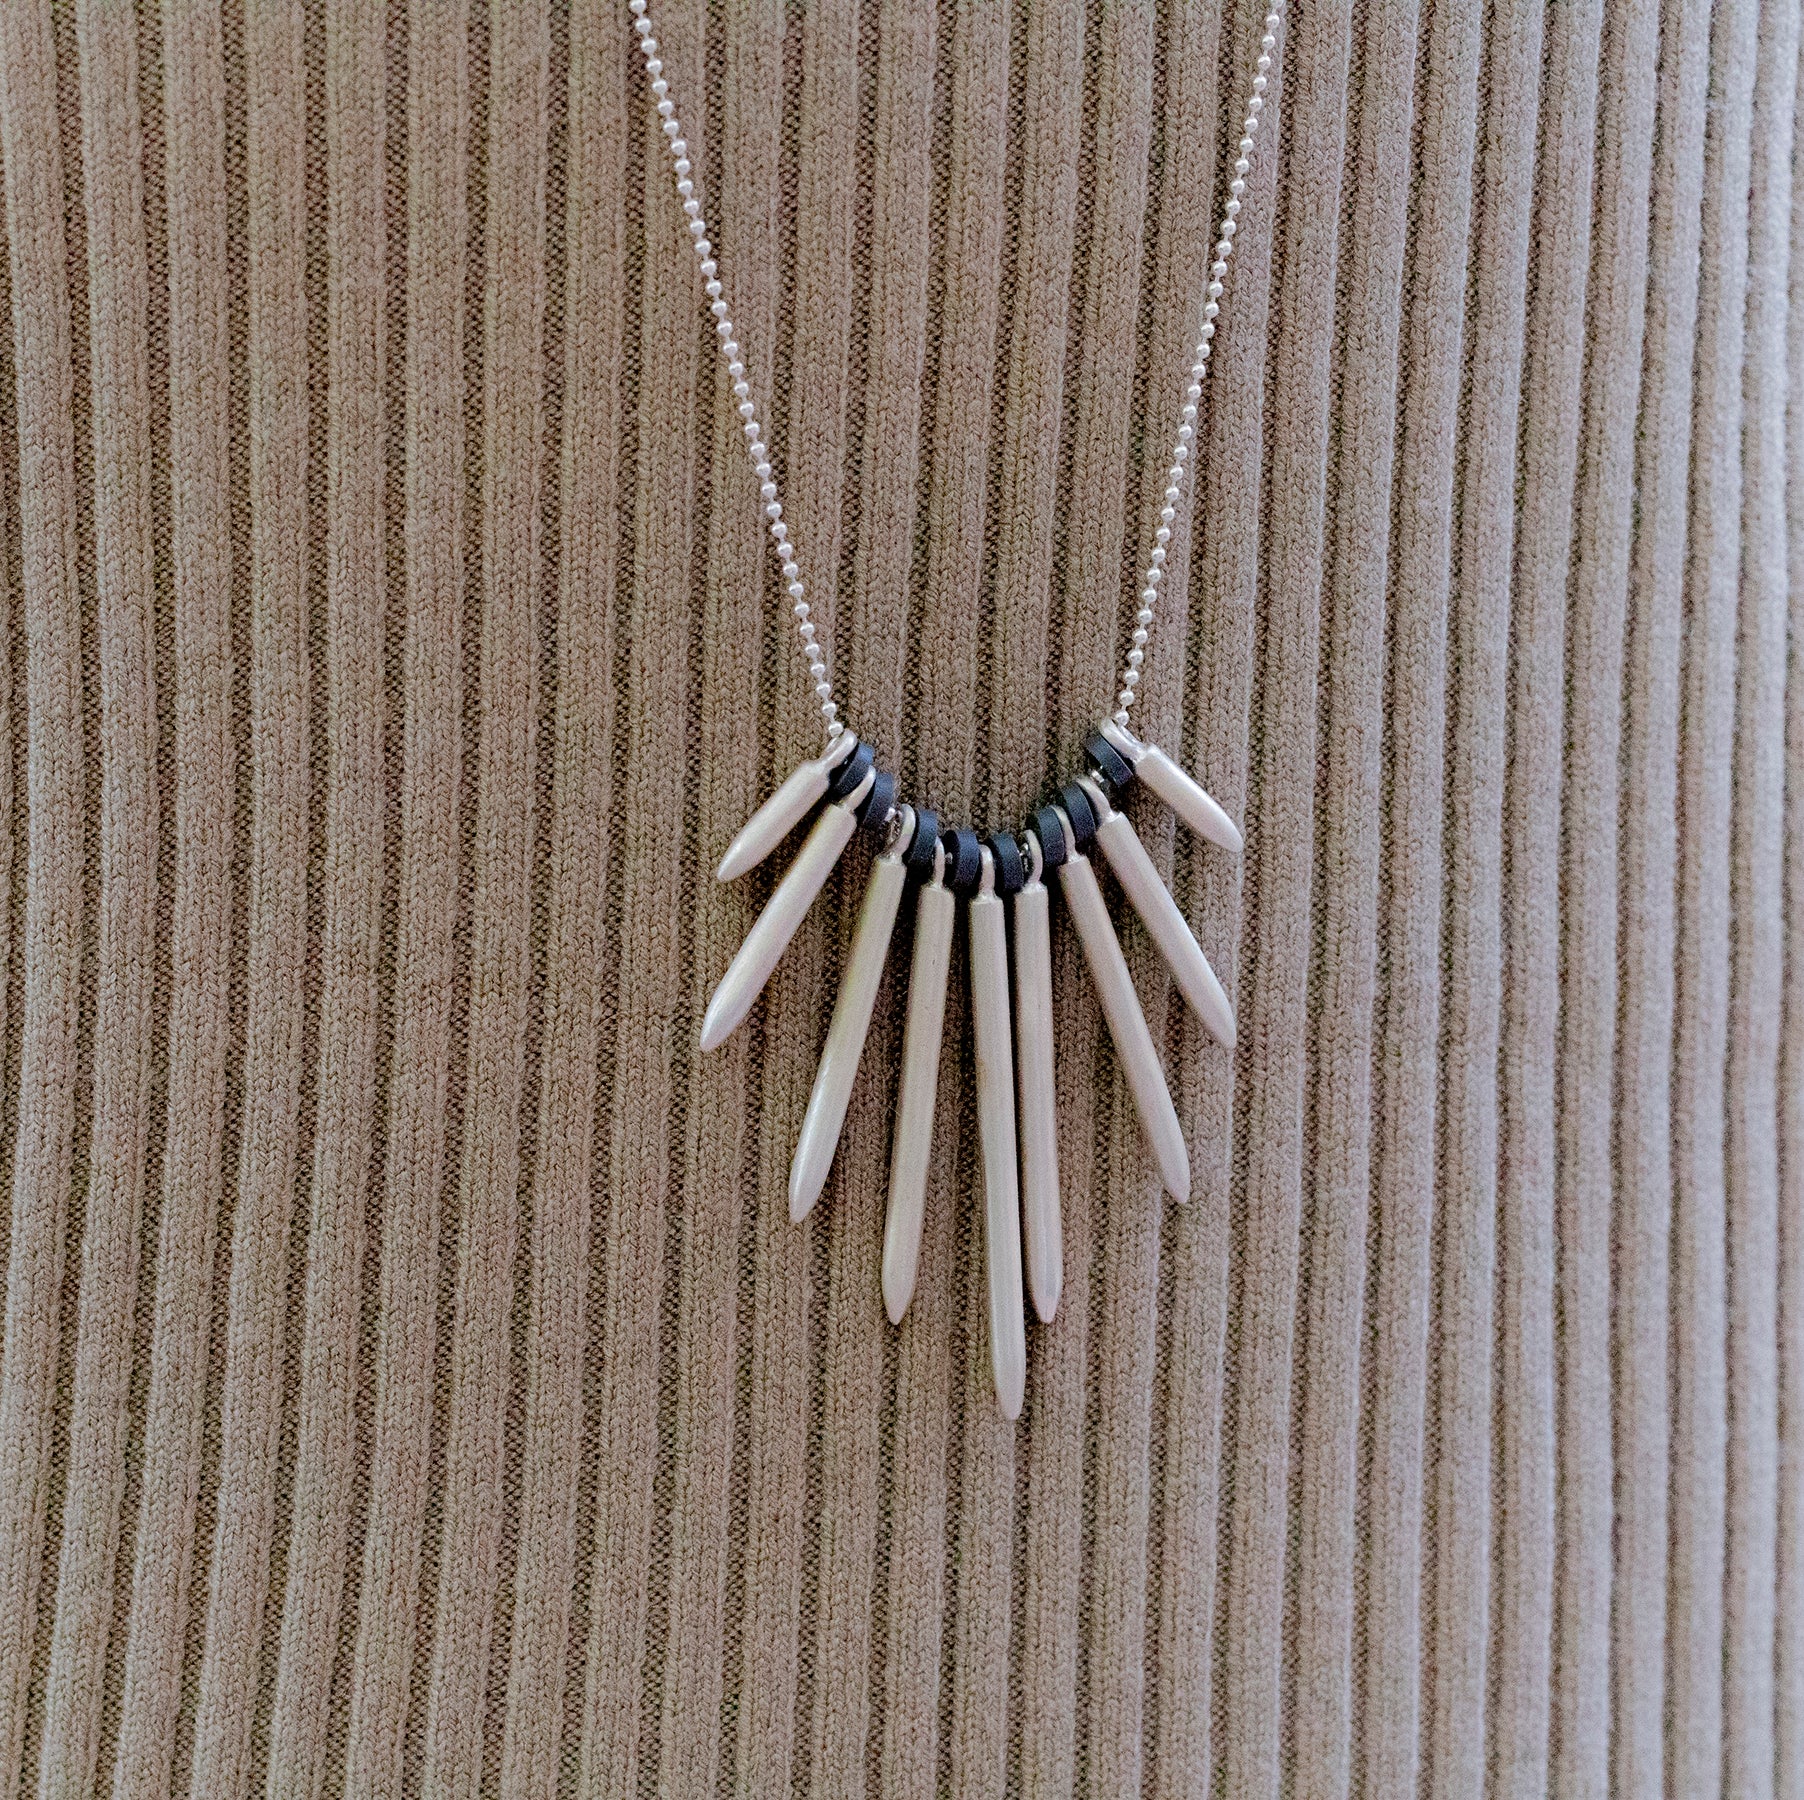 Long Silver Spike Necklace For Women